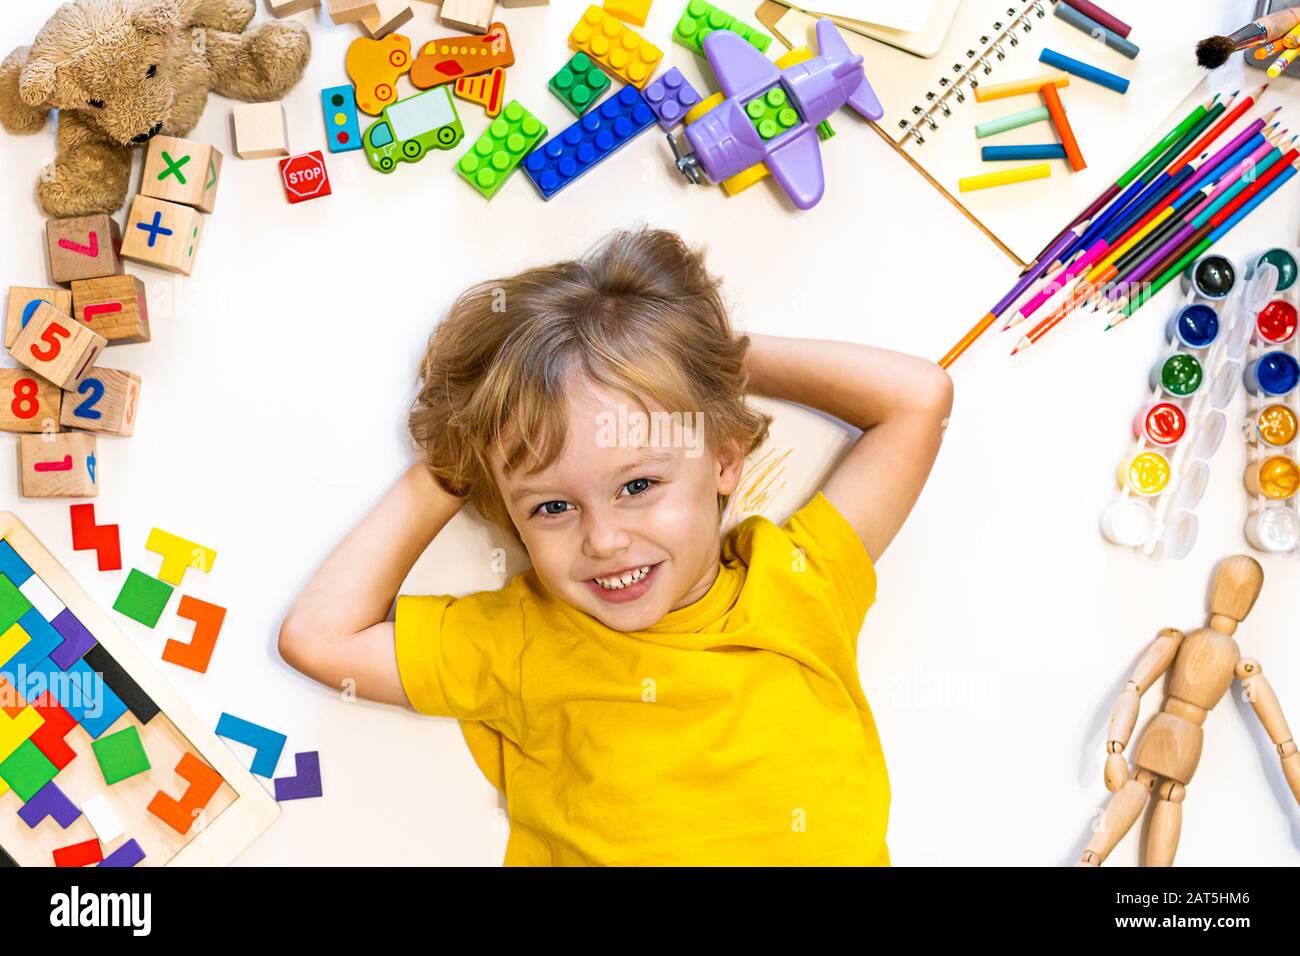 Cute prescool smiling boy draw and play with blocks, plane and cars. Educational toys and school supplies for preschool and kindergarten. Child at home or daycare. Top view Stock Photo